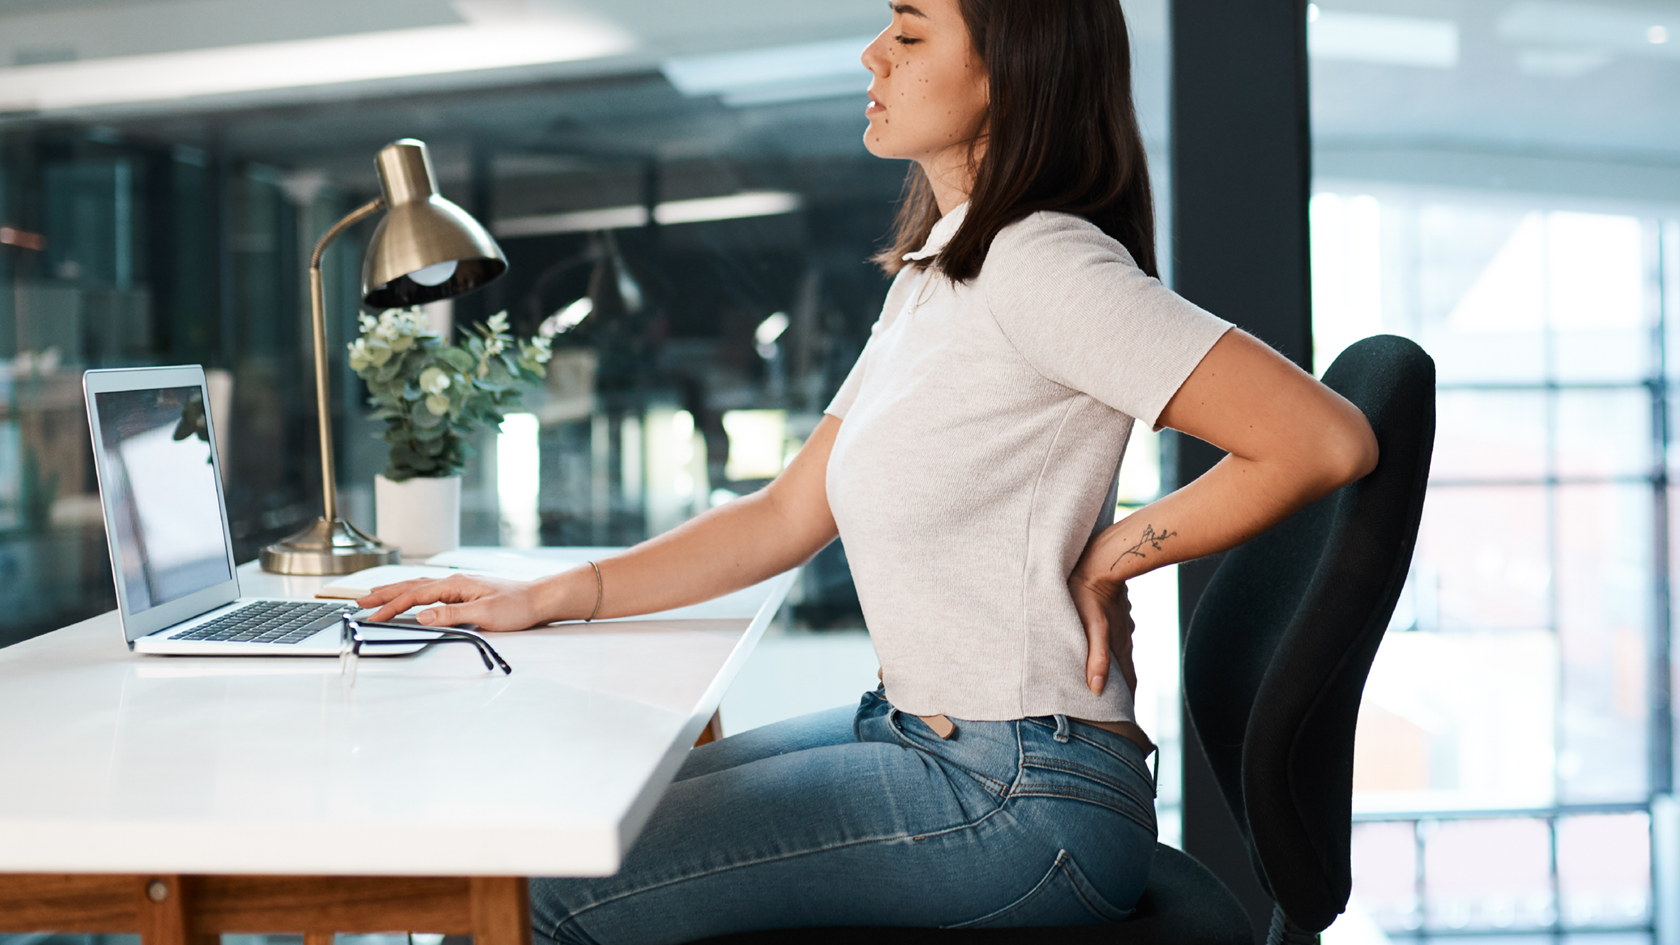 Back pain stretches: “I tried 3 ways to improve my posture and this is what happened”